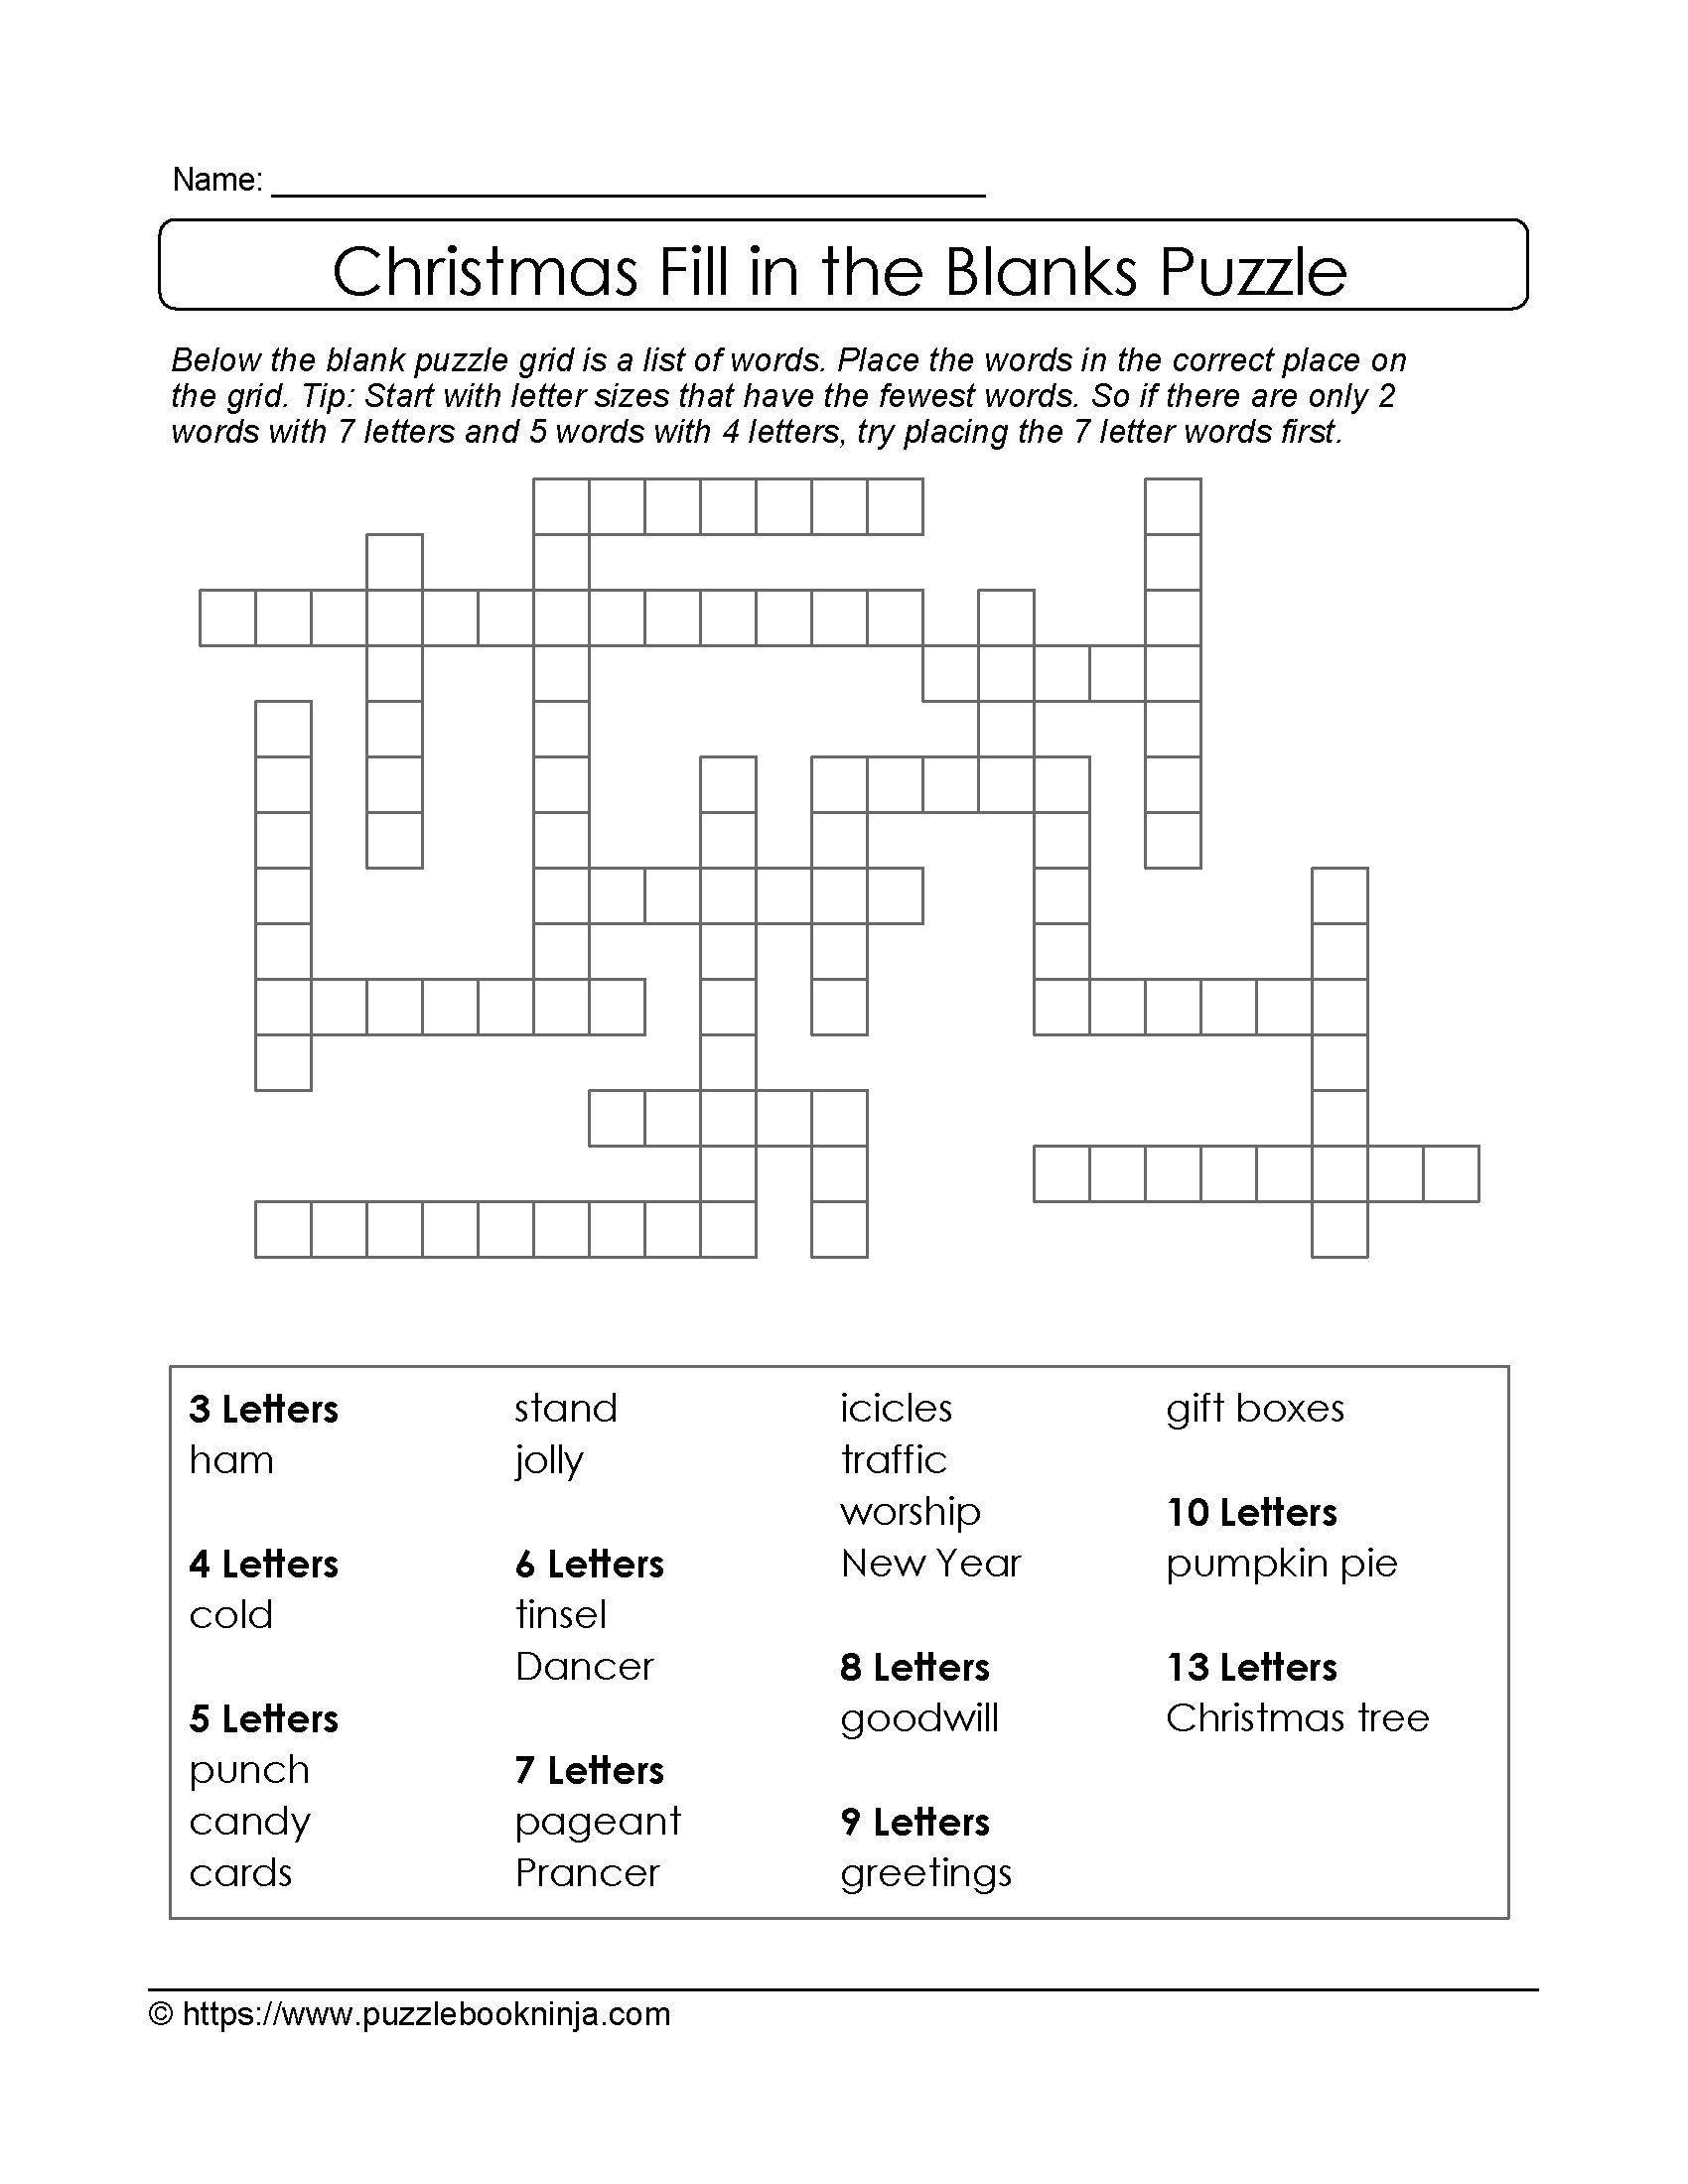 Freebie Xmas Puzzle To Print. Fill In The Blanks Crossword Like - Printable Xmas Puzzles